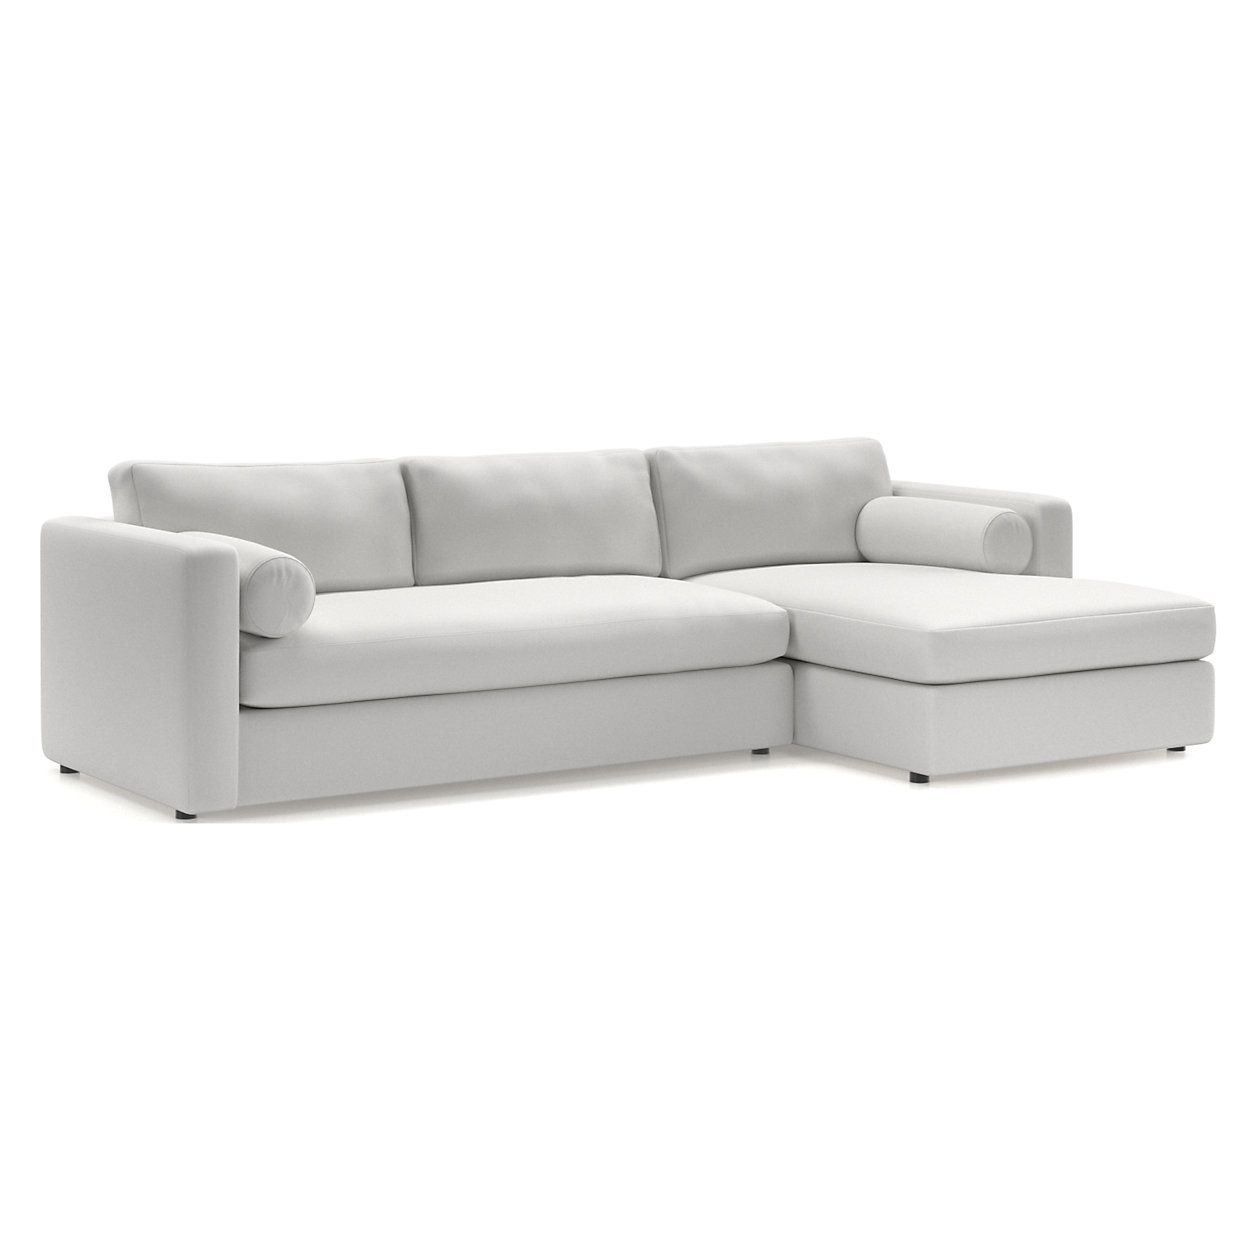 Aris 2-Piece Right-Arm Chaise Sectional Sofa + Reviews | Crate & Barrel | Crate & Barrel